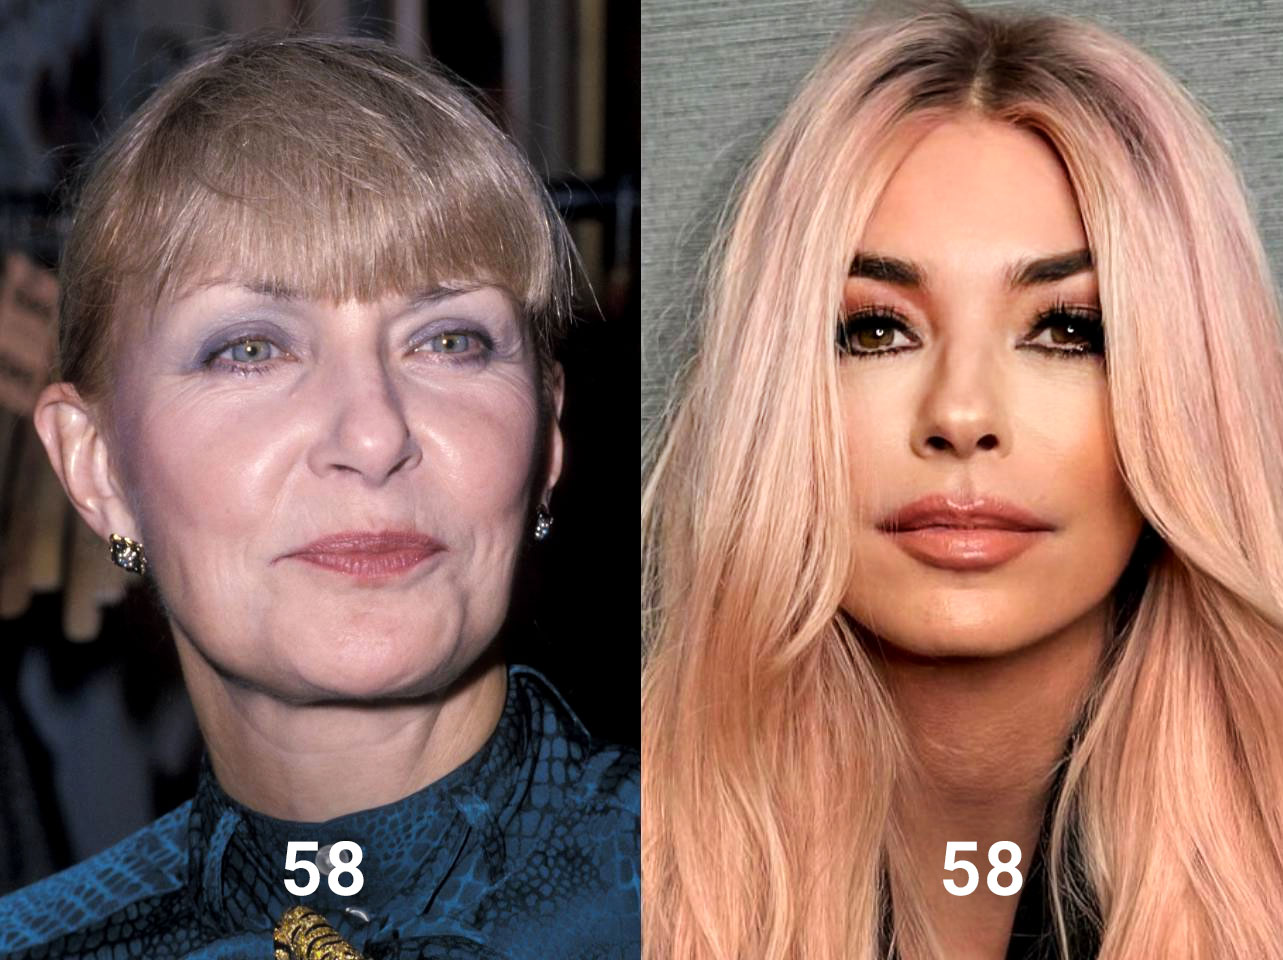 Joanne Woodward and Shania Twain at 58 | Source: Getty Images | Instagram/shaniatwain